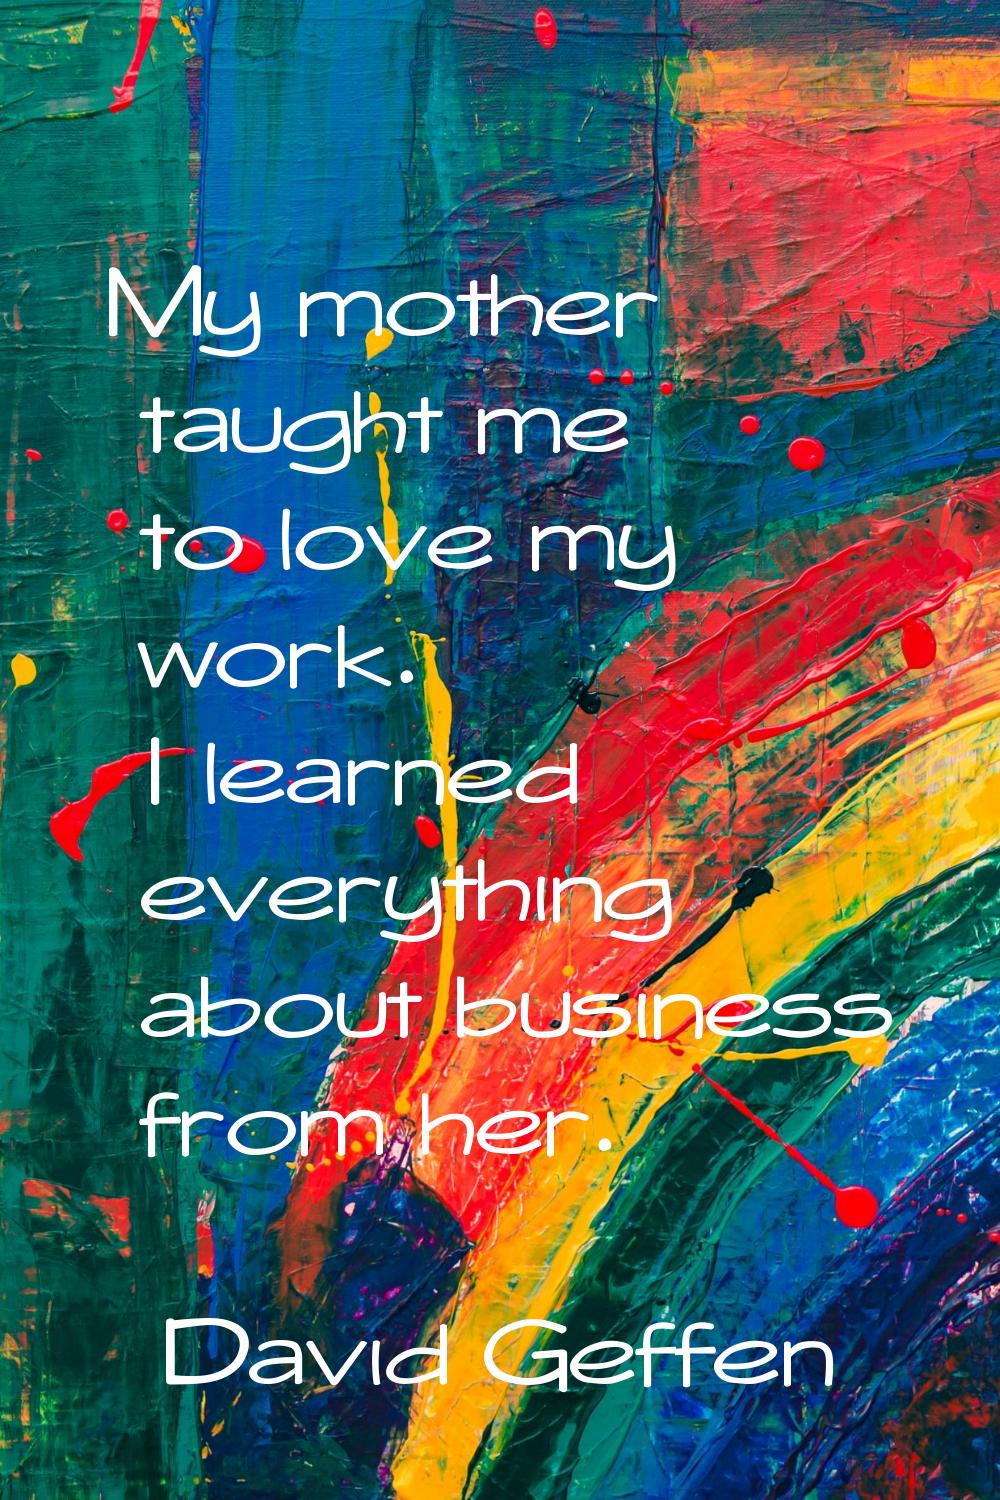 My mother taught me to love my work. I learned everything about business from her.